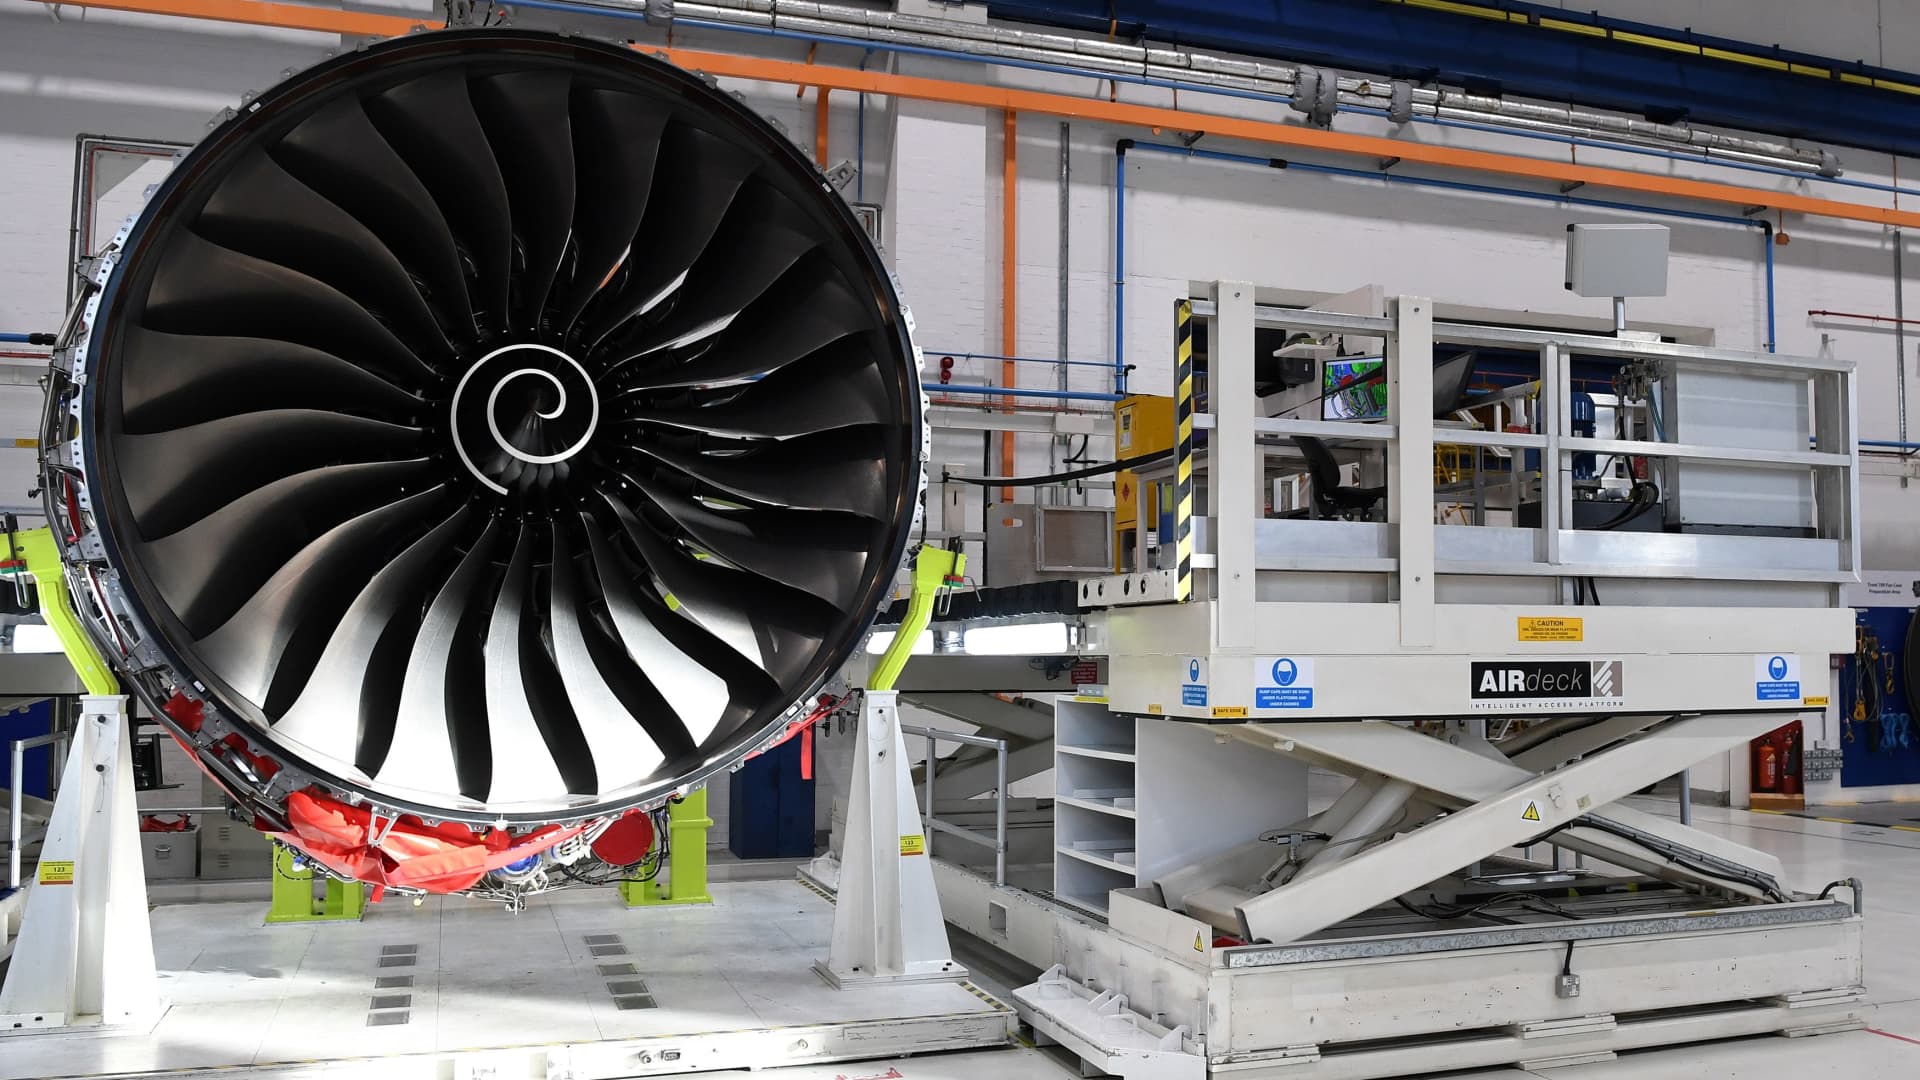 Rolls-Royce shares soar by 23% after annual results crush expectations